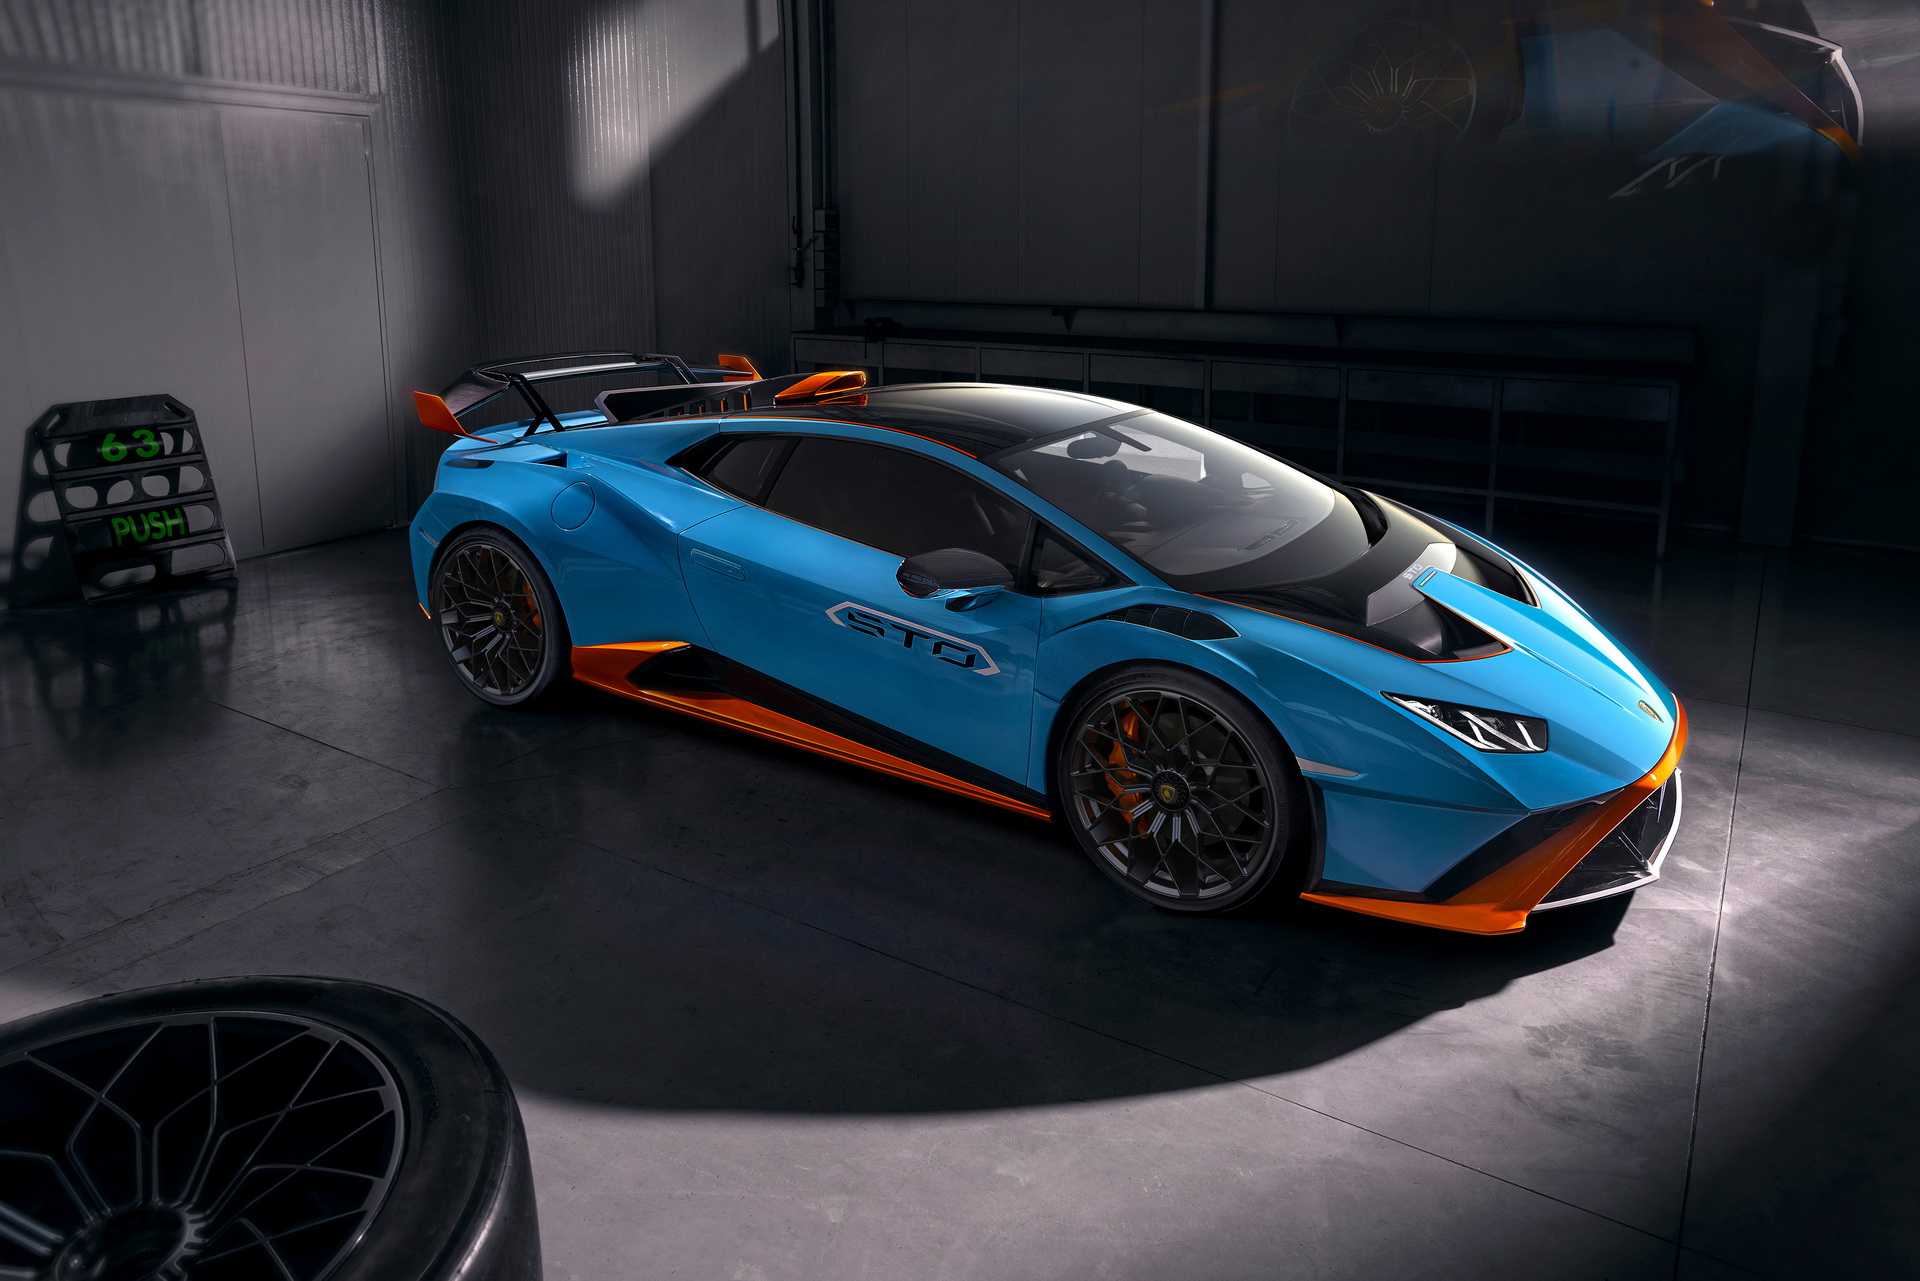 New Huracan STO Is A Super Trofeo Racer For The Street